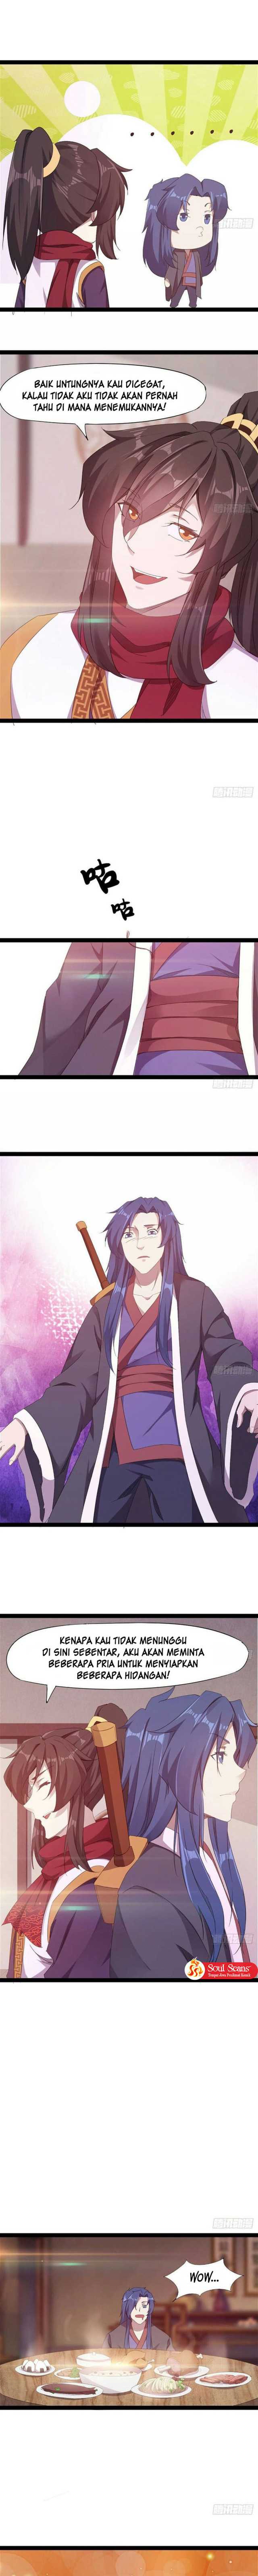 Path Of The Sword Chapter 24 - 125